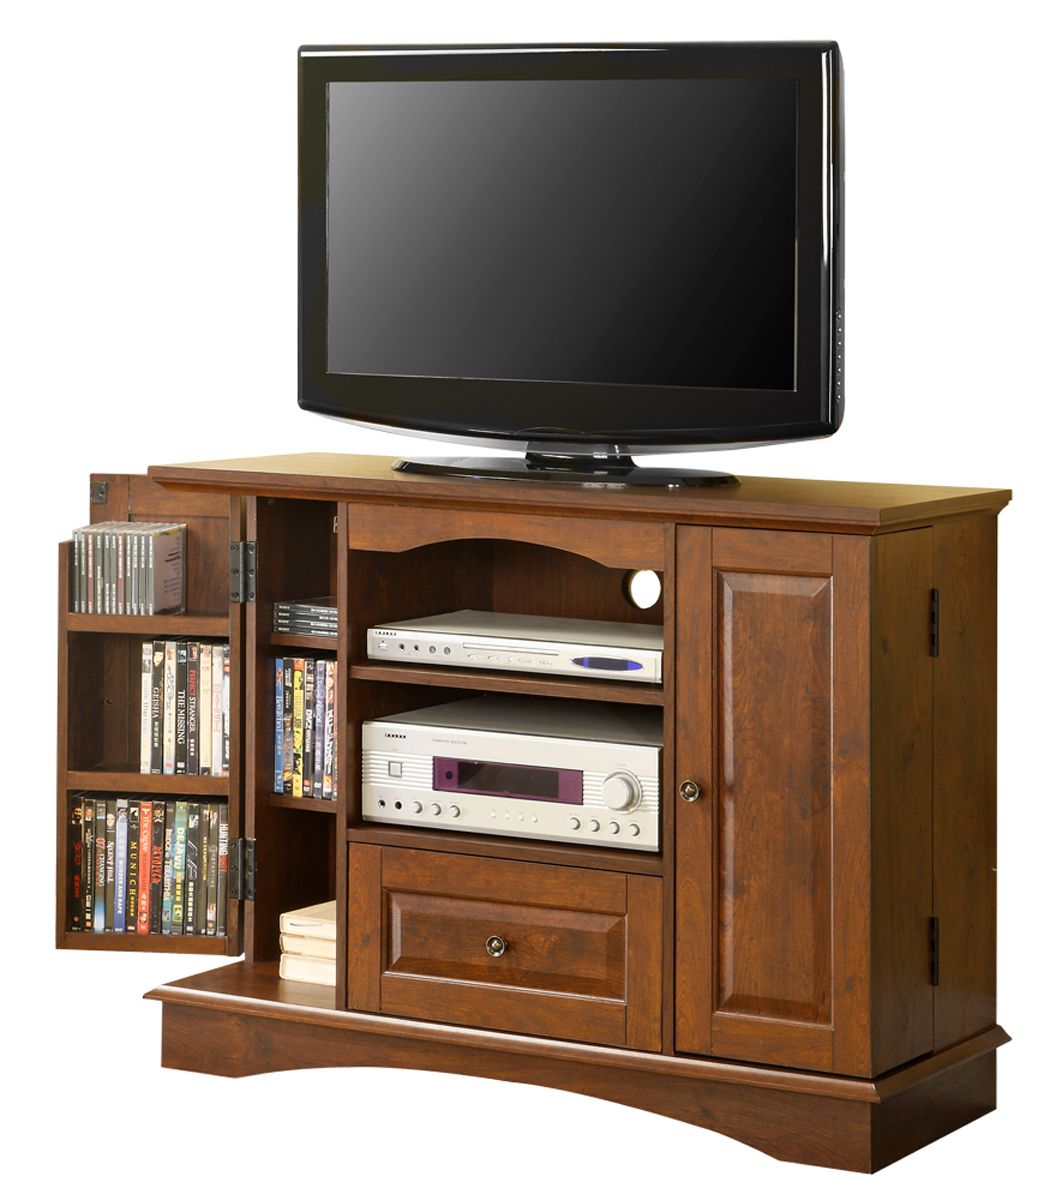 42 Inch Wood Tv Stand With Media Storage In Tv Stands With Regard To Horizontal Or Vertical Storage Shelf Tv Stands (View 6 of 15)